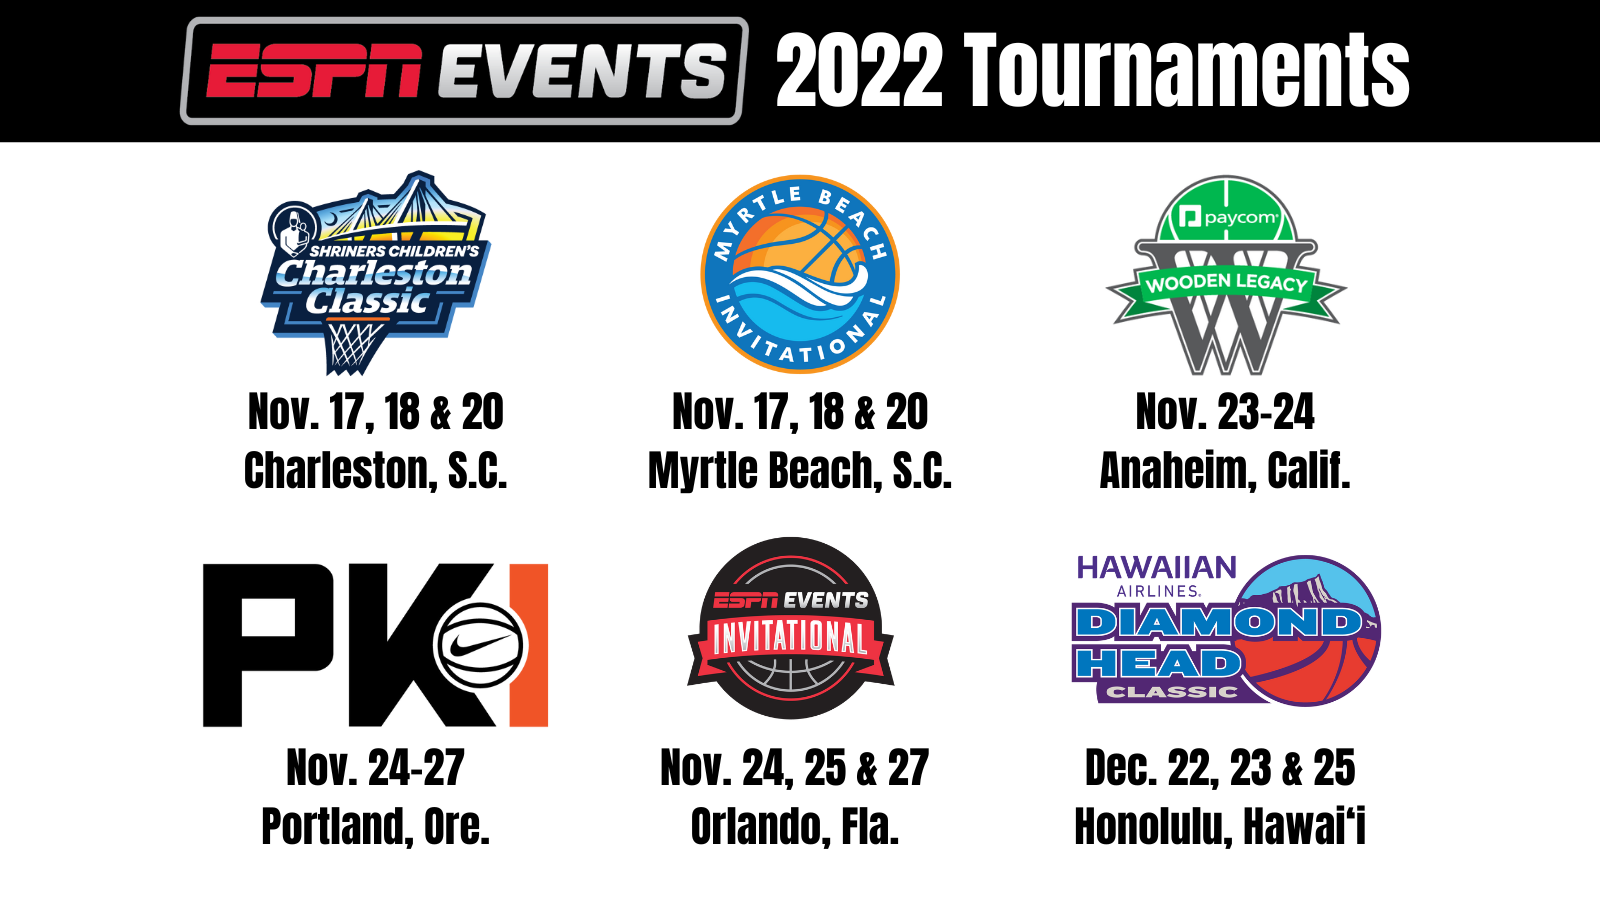 Matchups for ESPN Events’ 2022 Men’s and Women’s College Basketball